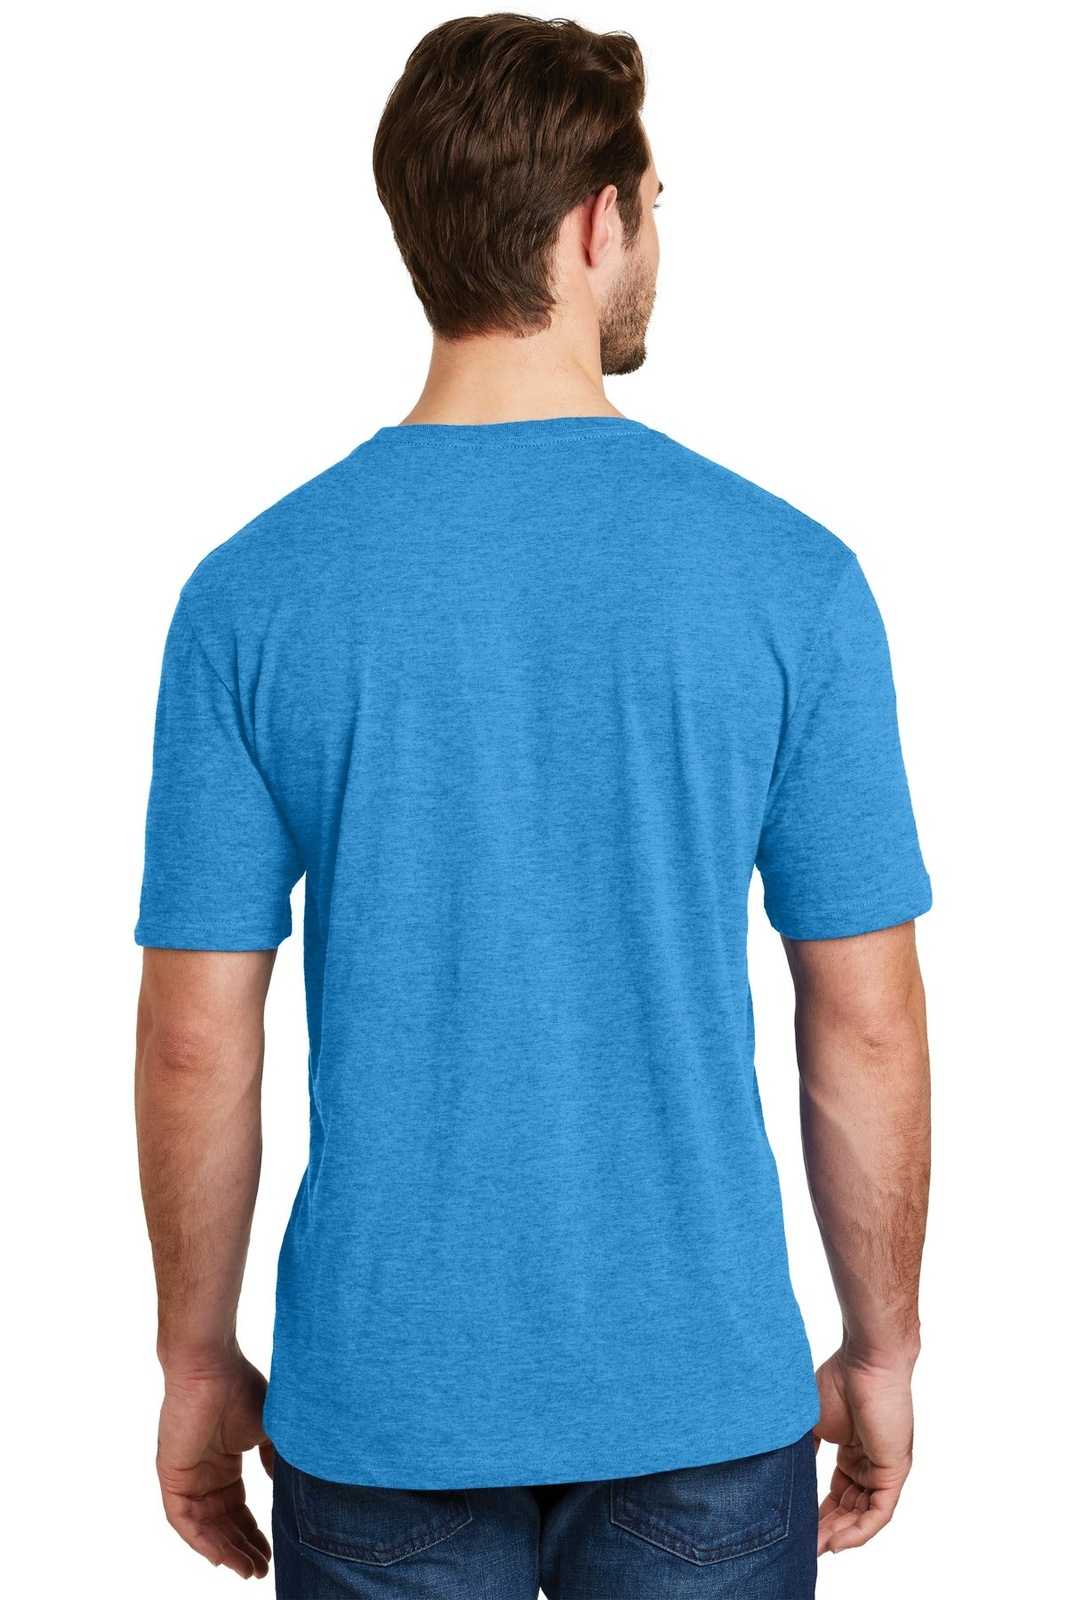 District DM108 Perfect Blend Tee - Heathered Bright Turquoise - HIT a Double - 2